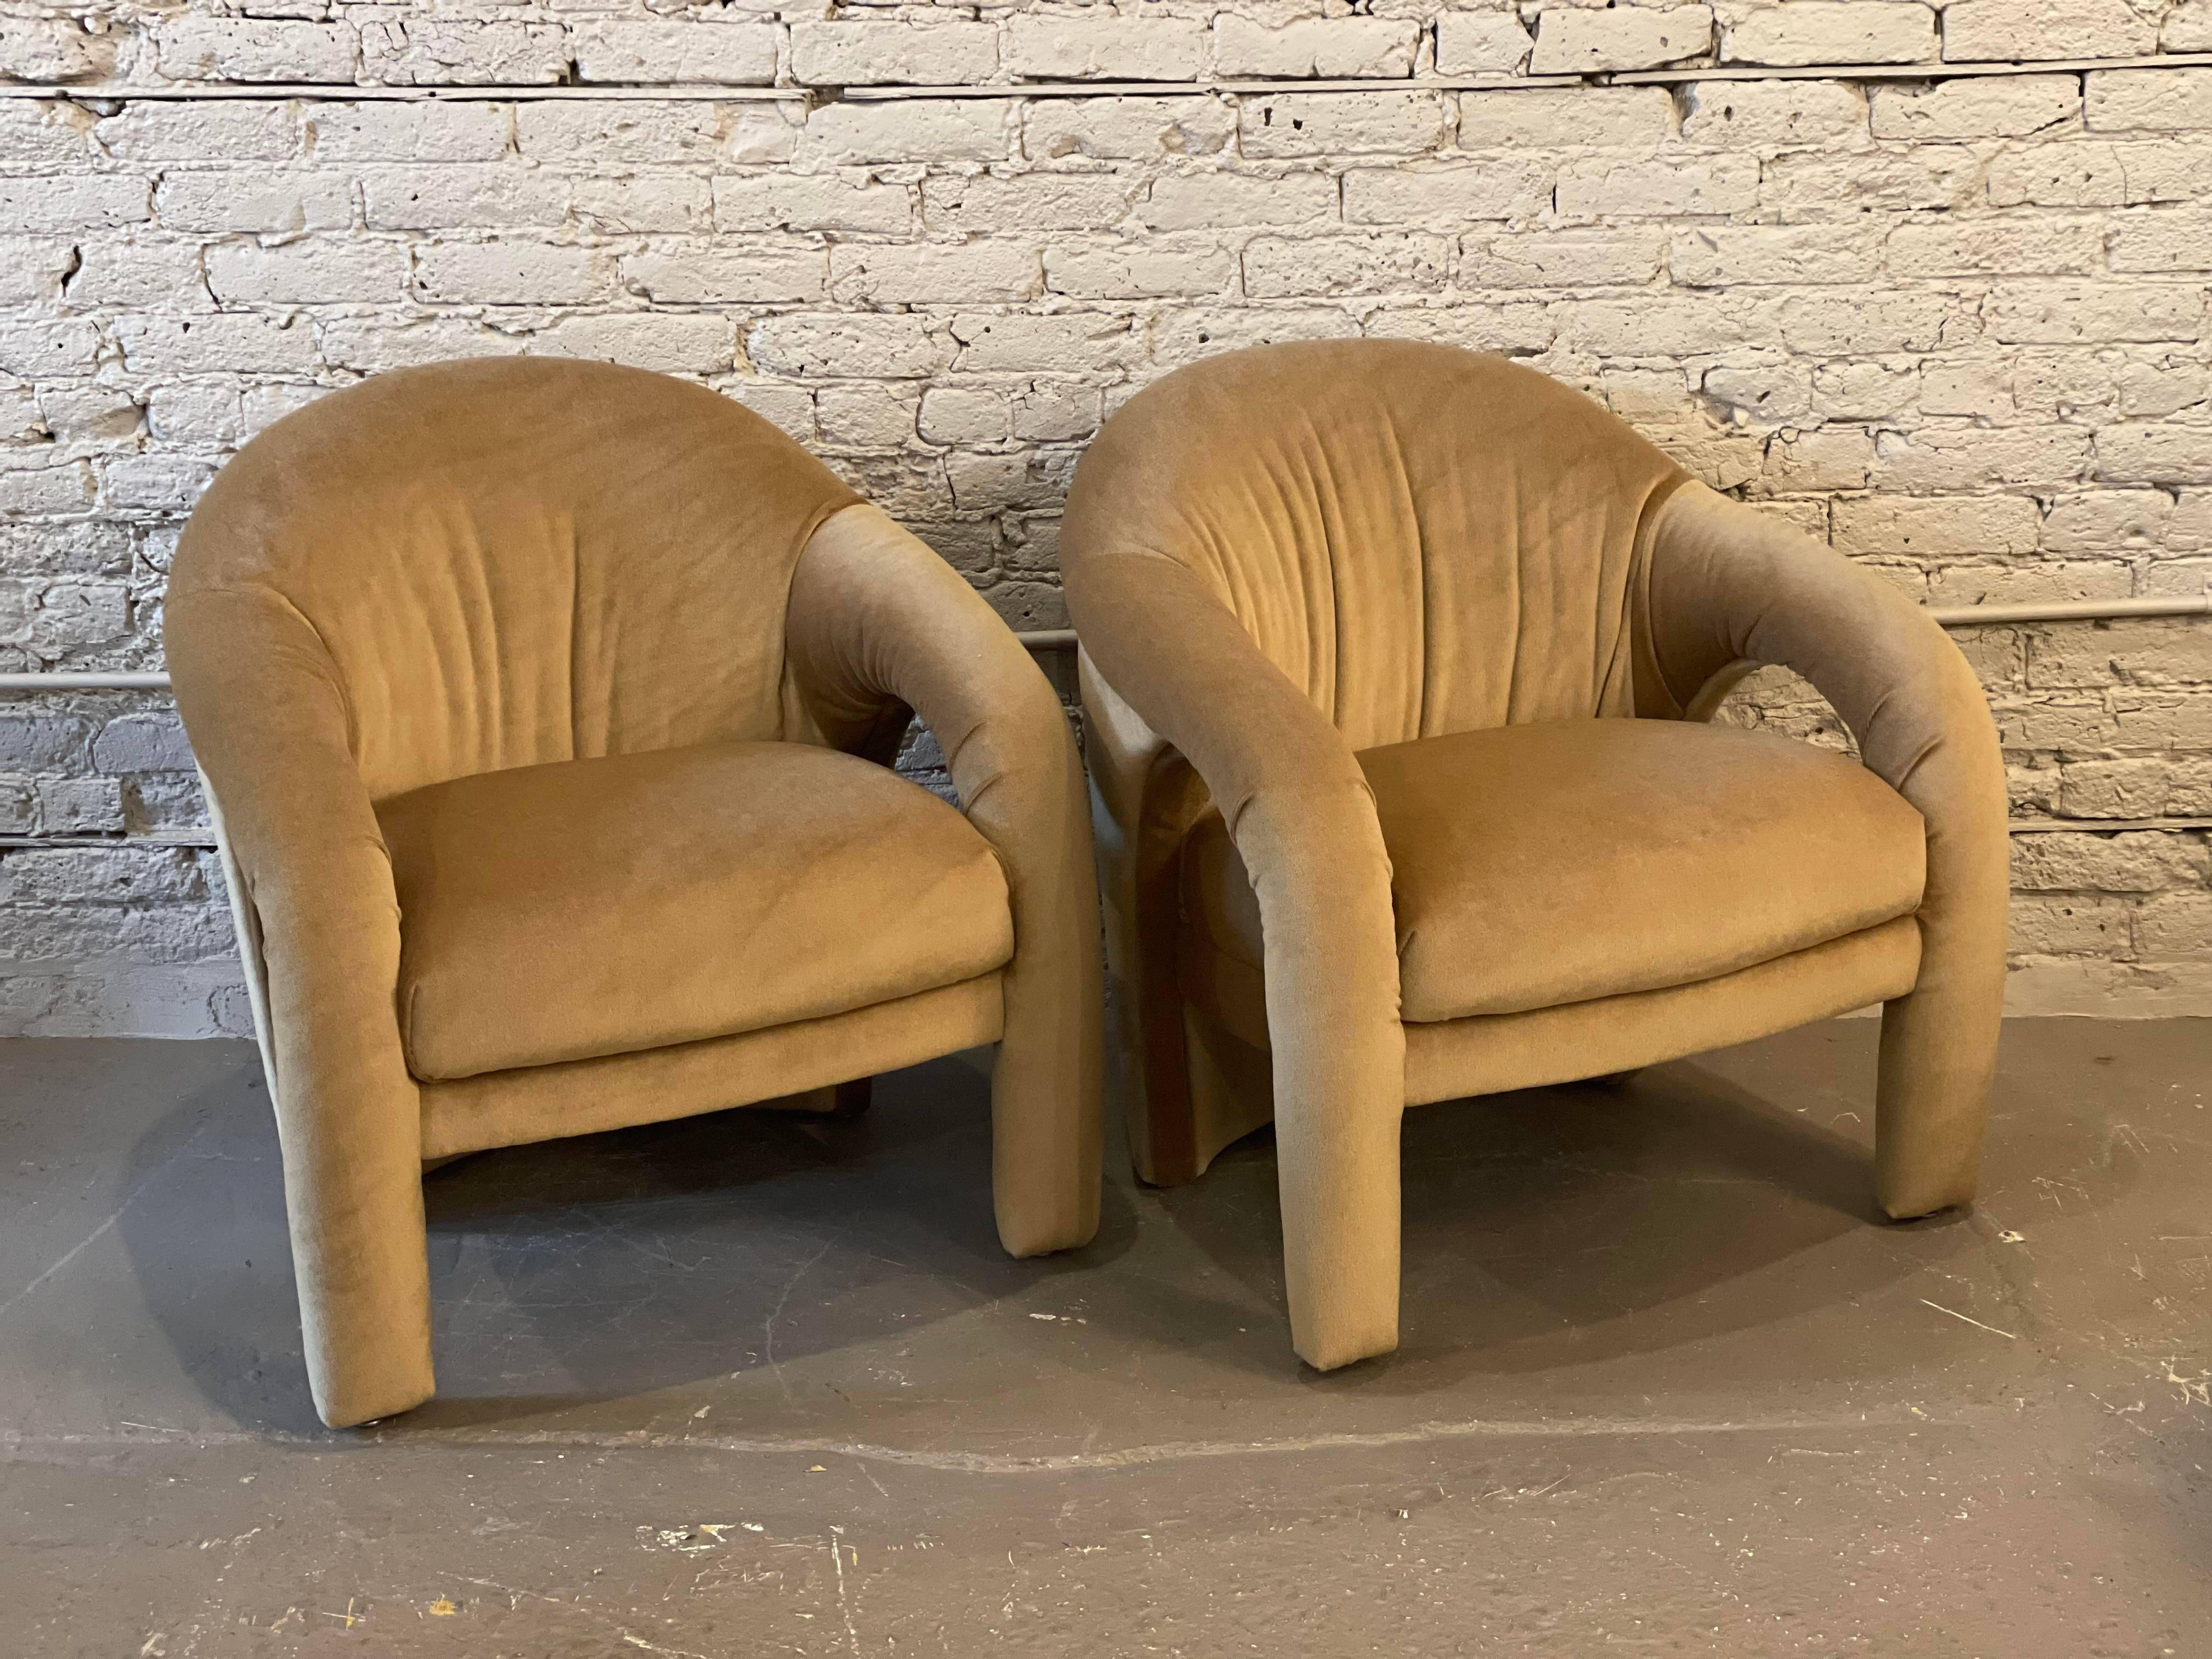 1980s Postmodern Arc Sculptural Chairs in Camel Mohair, a Pair For Sale 2